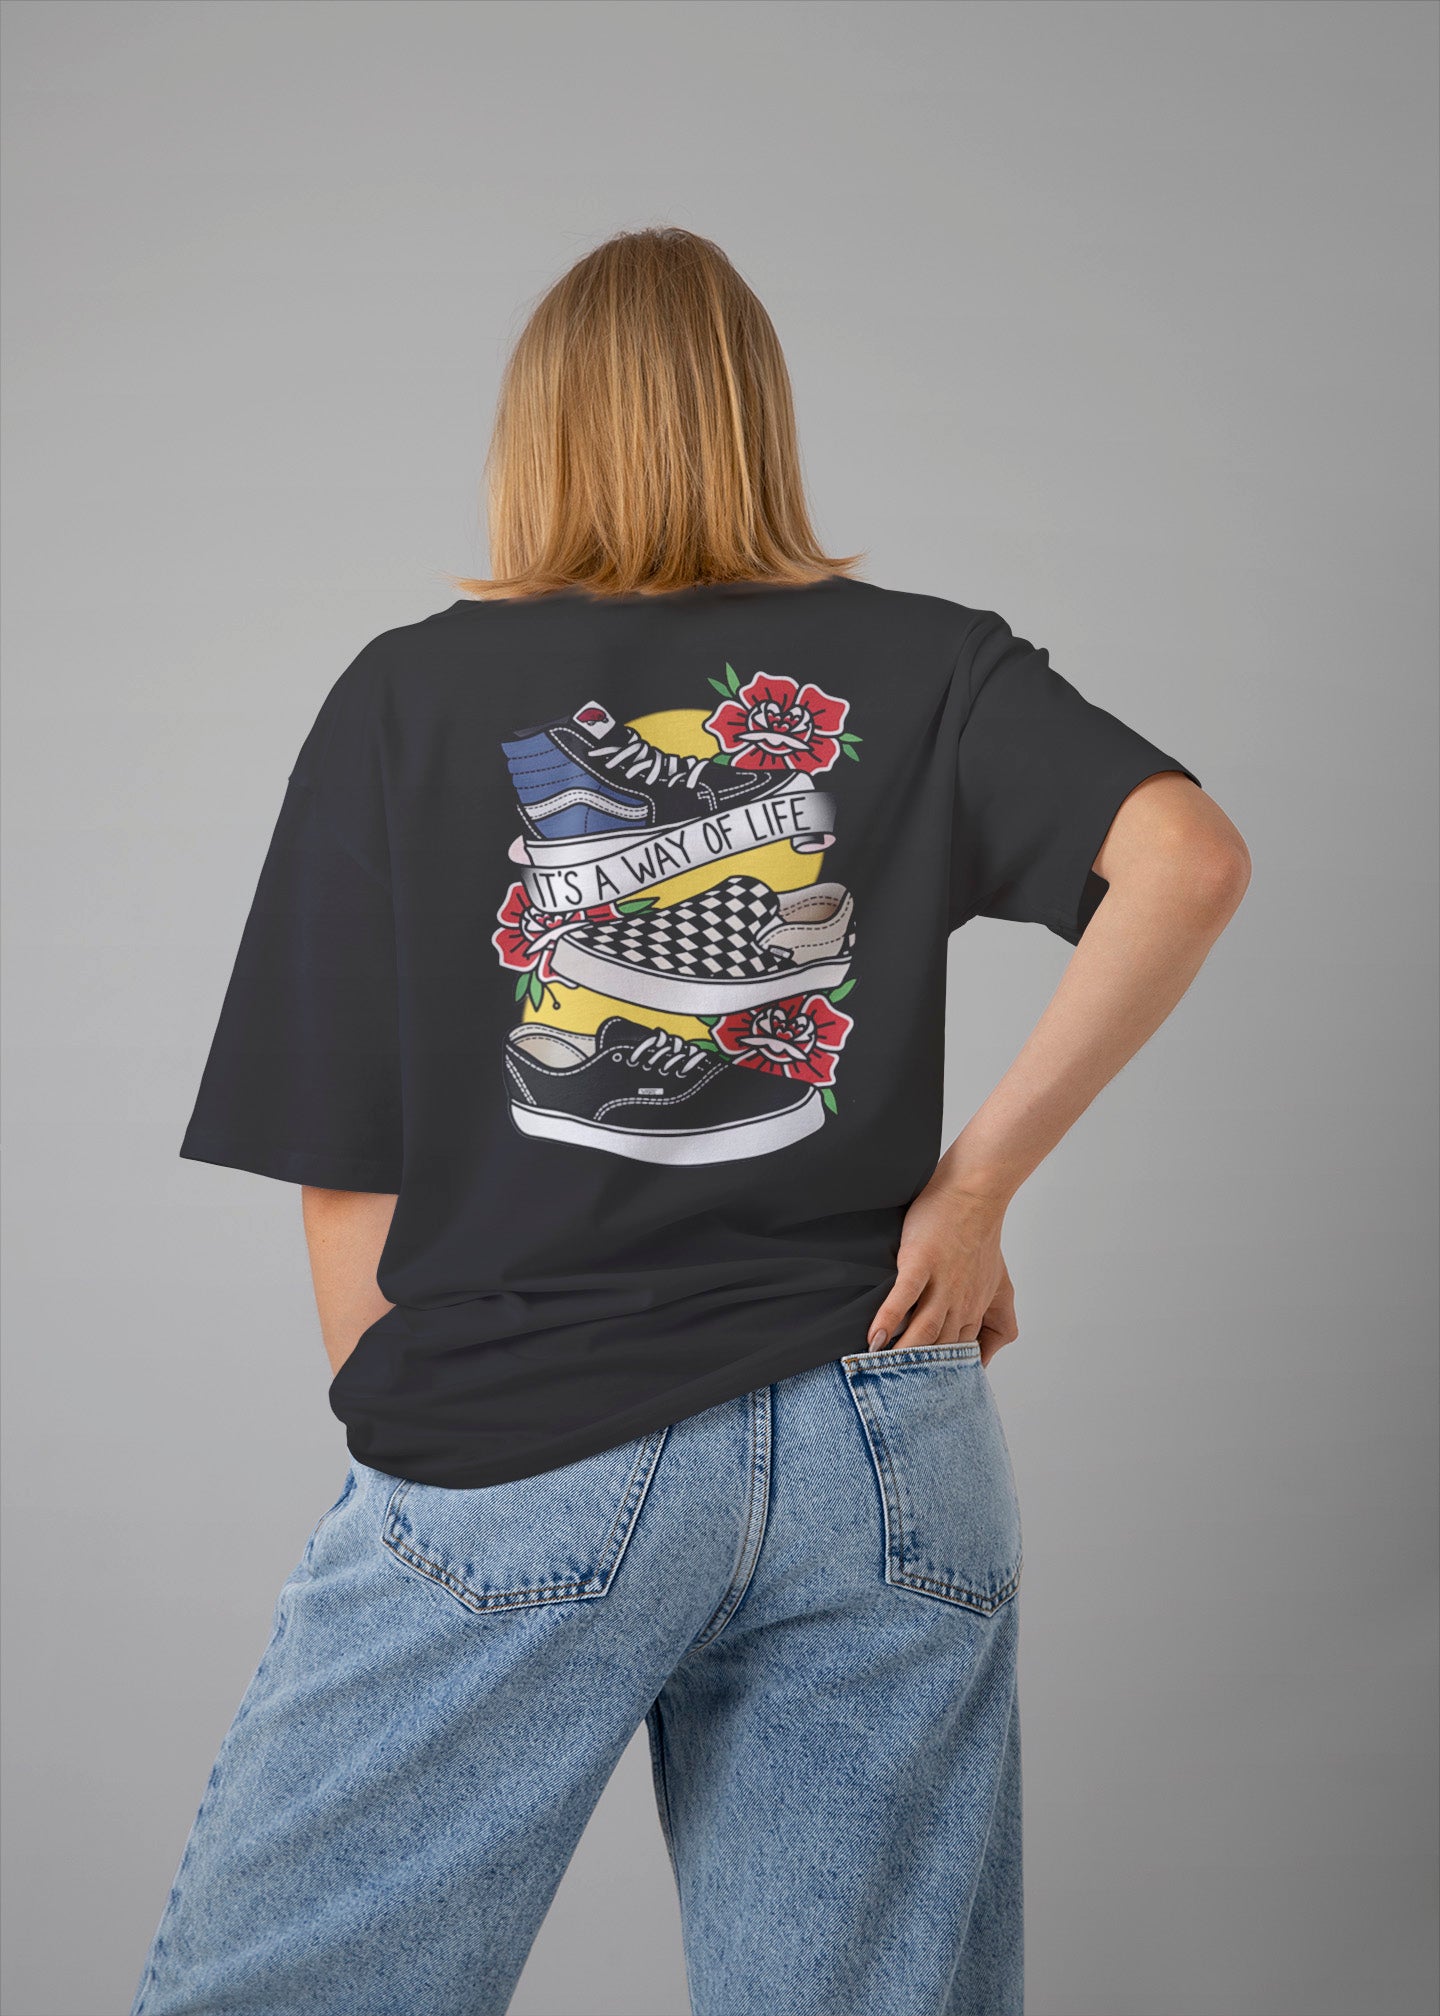 It's Way of Life Graphic Printed Oversized T-shirt